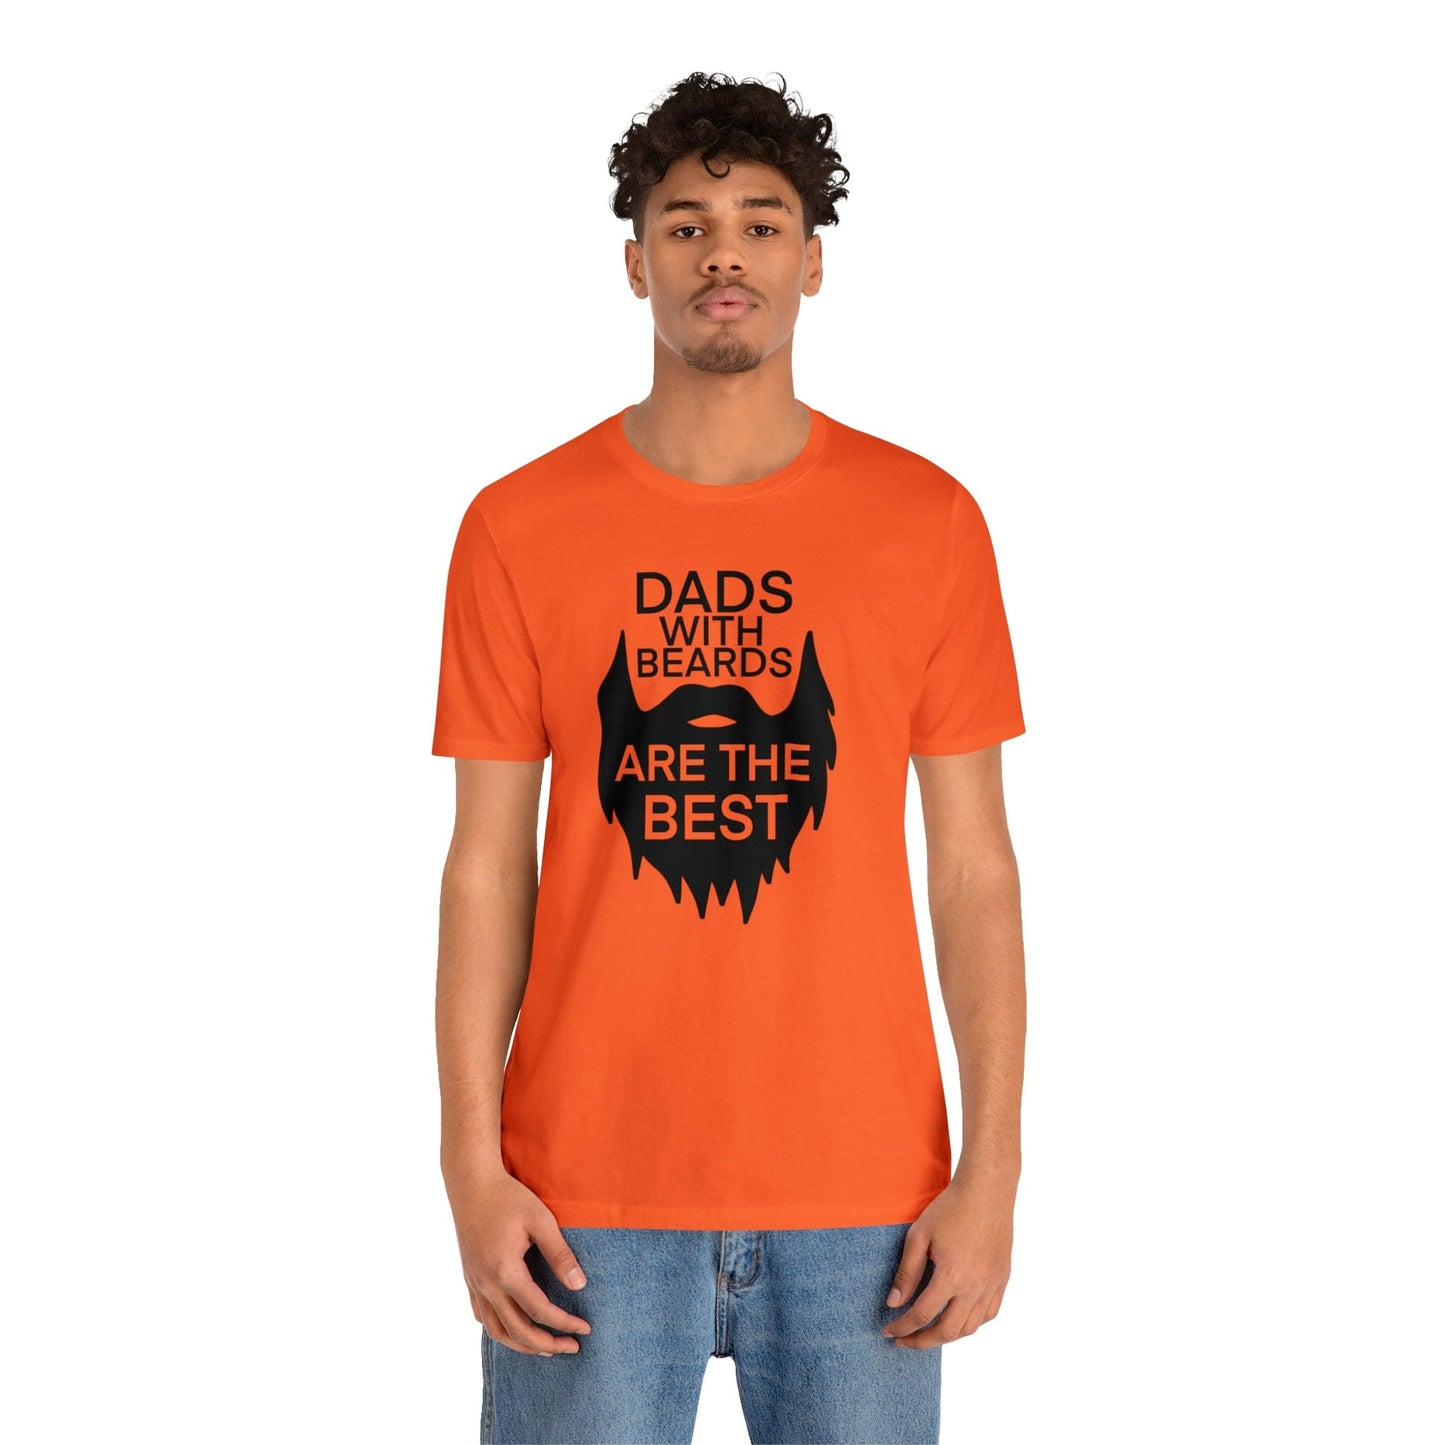 Dads With Beards Are The Best - Father's Day T-Shirt